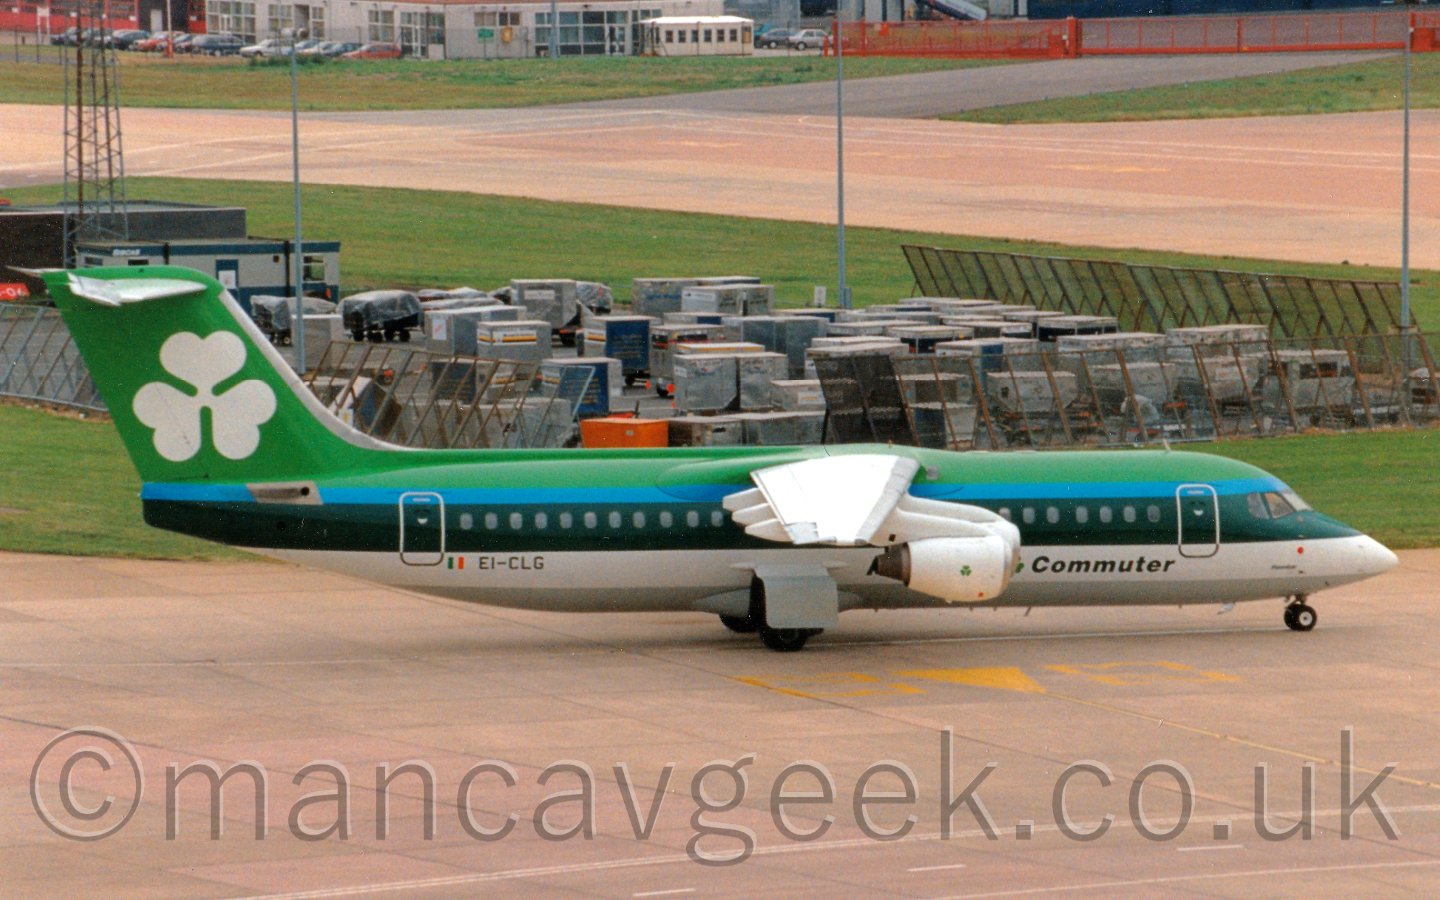 Side view of a green, blue, and white, high-winged, 4 engined jet airliner taxiing from left to right, with lots of luggage containers parked behind metal fences in the background.